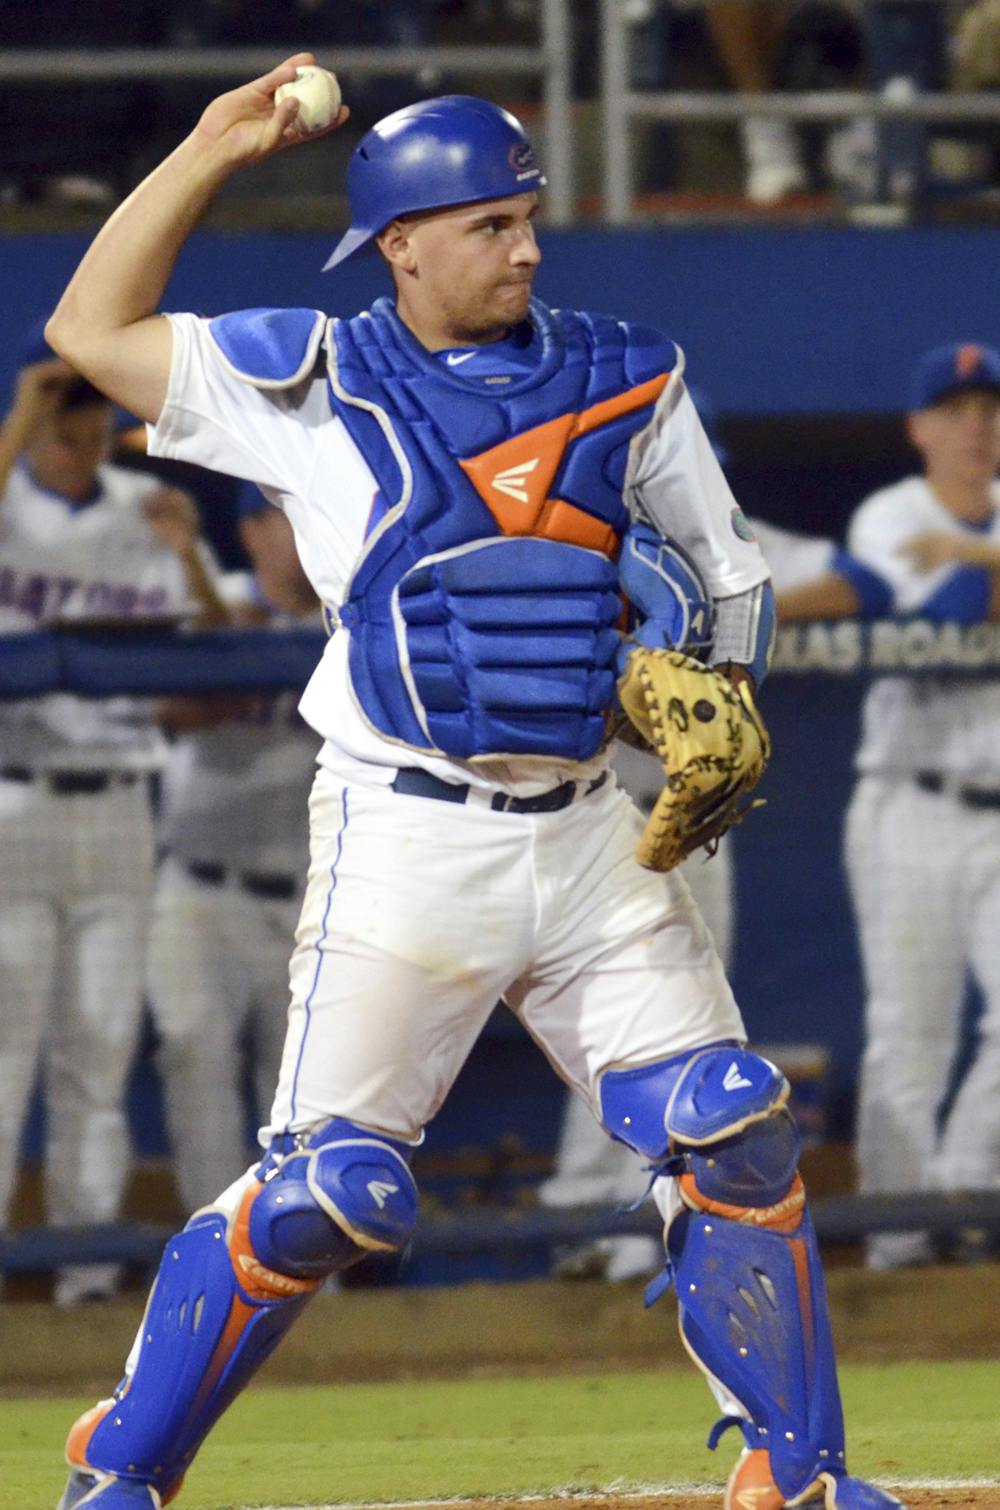 <p>UF freshman catcher Mike Rivera throws the ball back to pitcher Logan Shore (not pictured) during Florida's 14-3 win against South Carolina on April 10, 2015 at McKethan Stadium.</p>